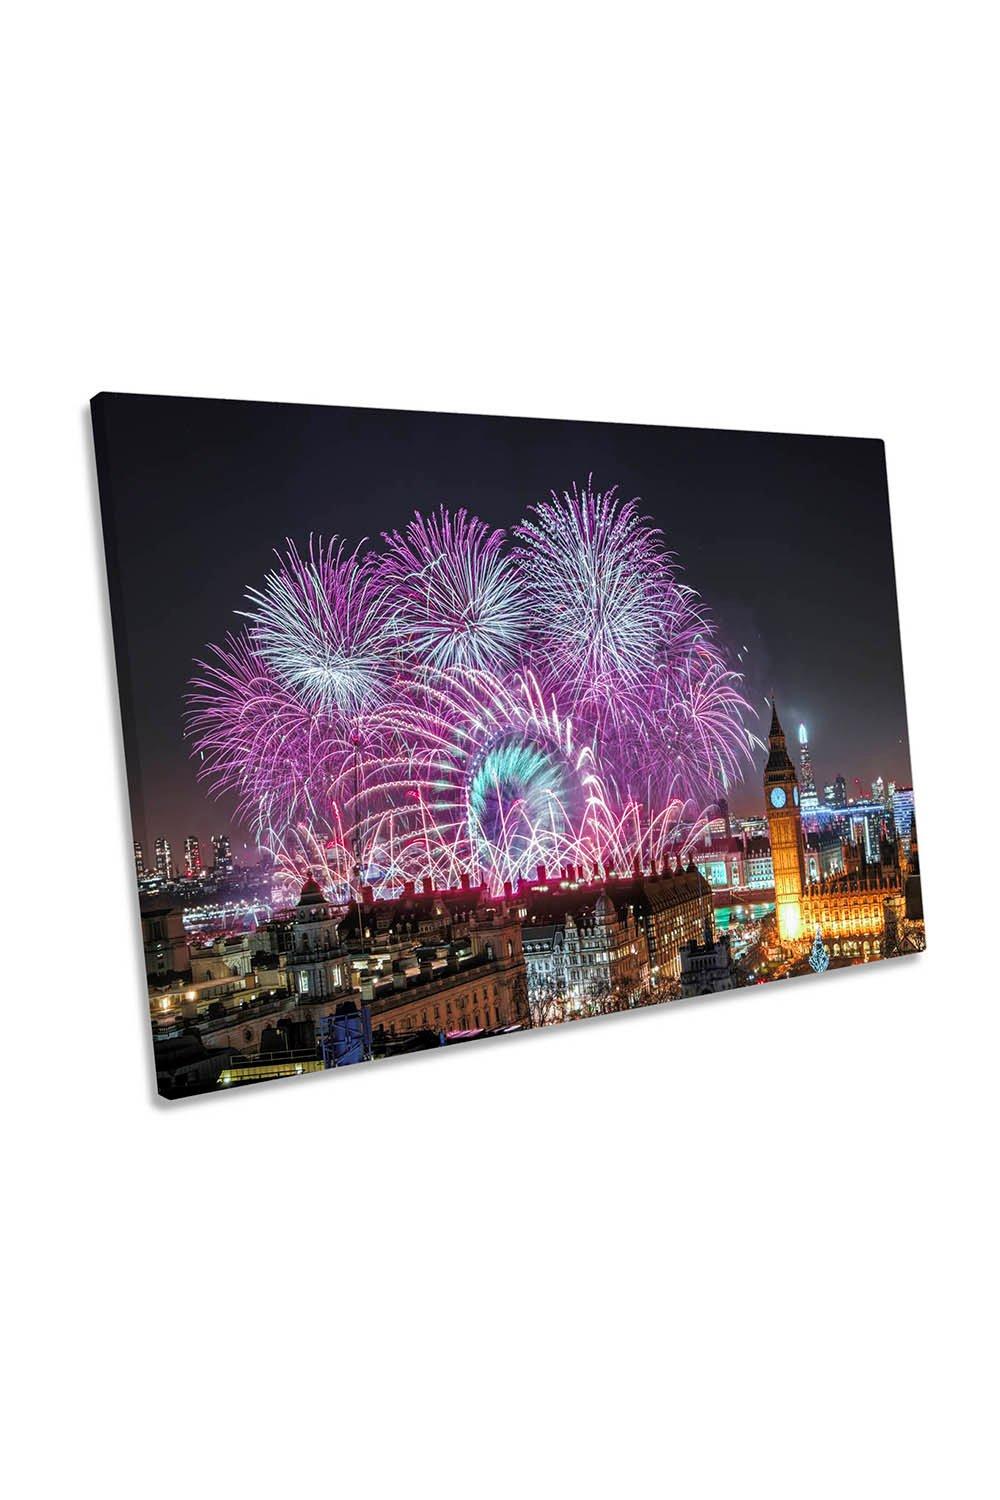 London City Fireworks Skyline Canvas Wall Art Picture Print